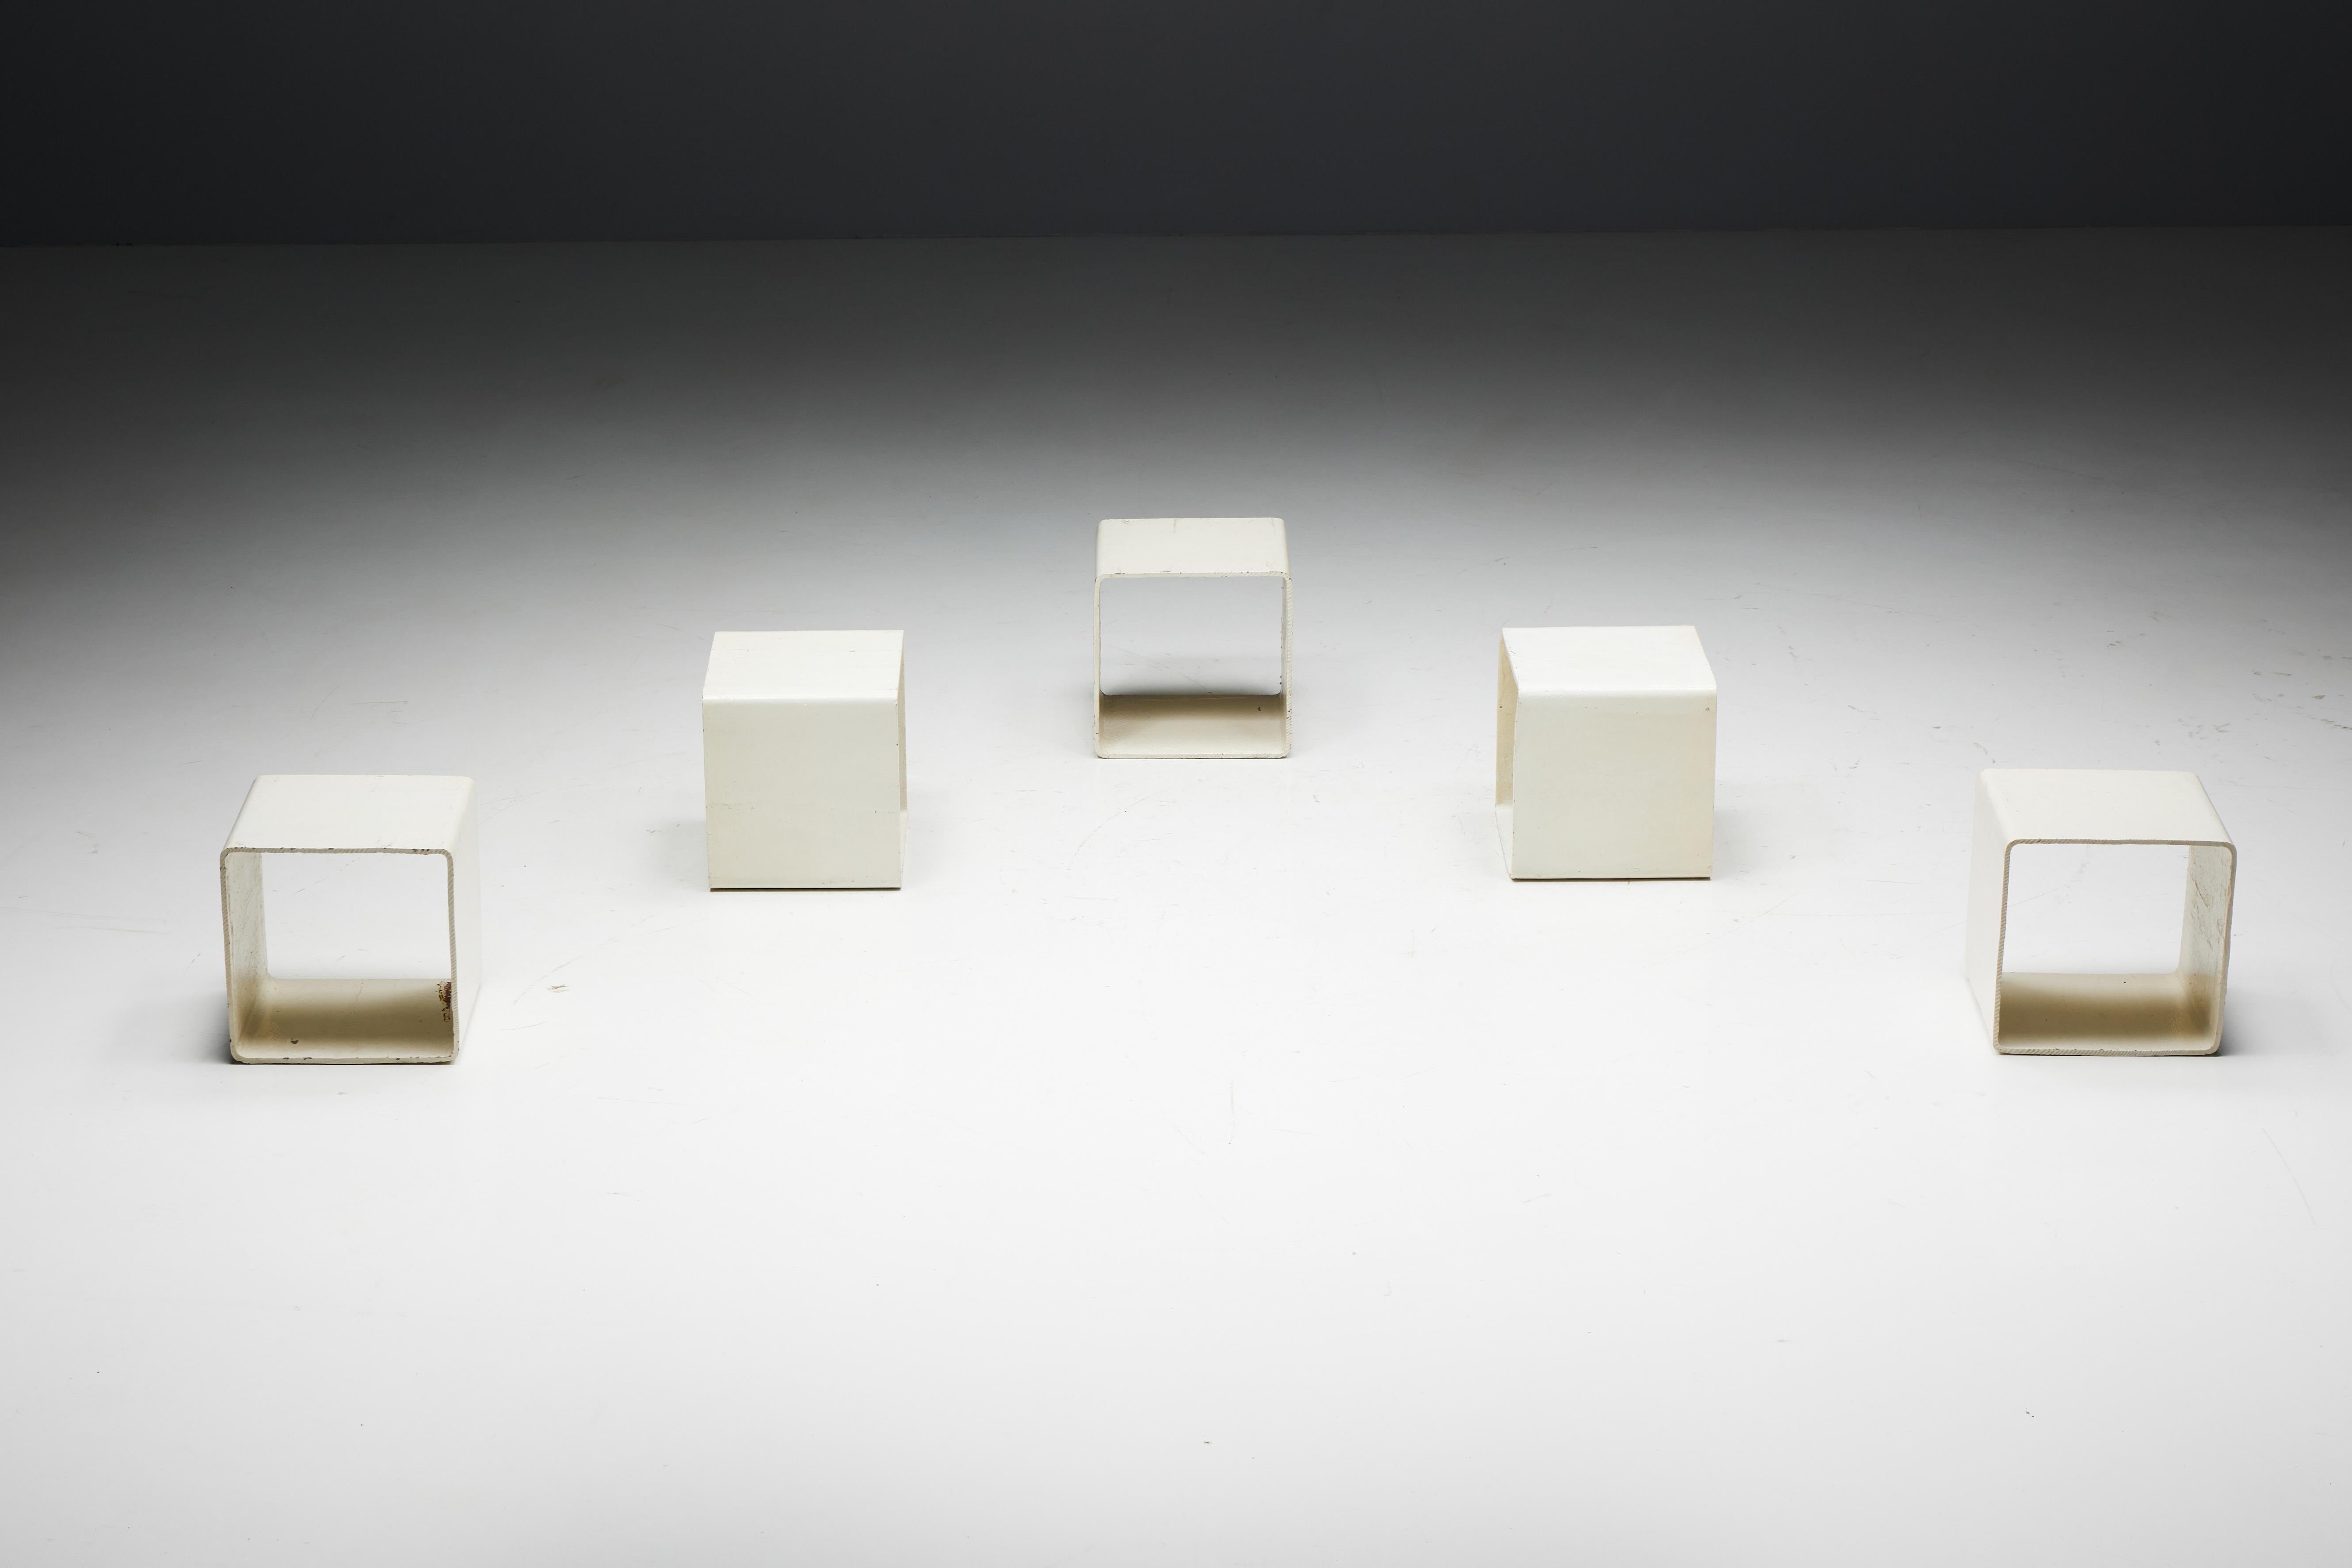 Willy Guhl's modular cubic side tables for Eternit AG, handmade in Switzerland in 1954. Each piece is a testament to Guhl's innovative design ethos, handcrafted with precision from fiber-reinforced cement and finished in an off-white lacquer. With